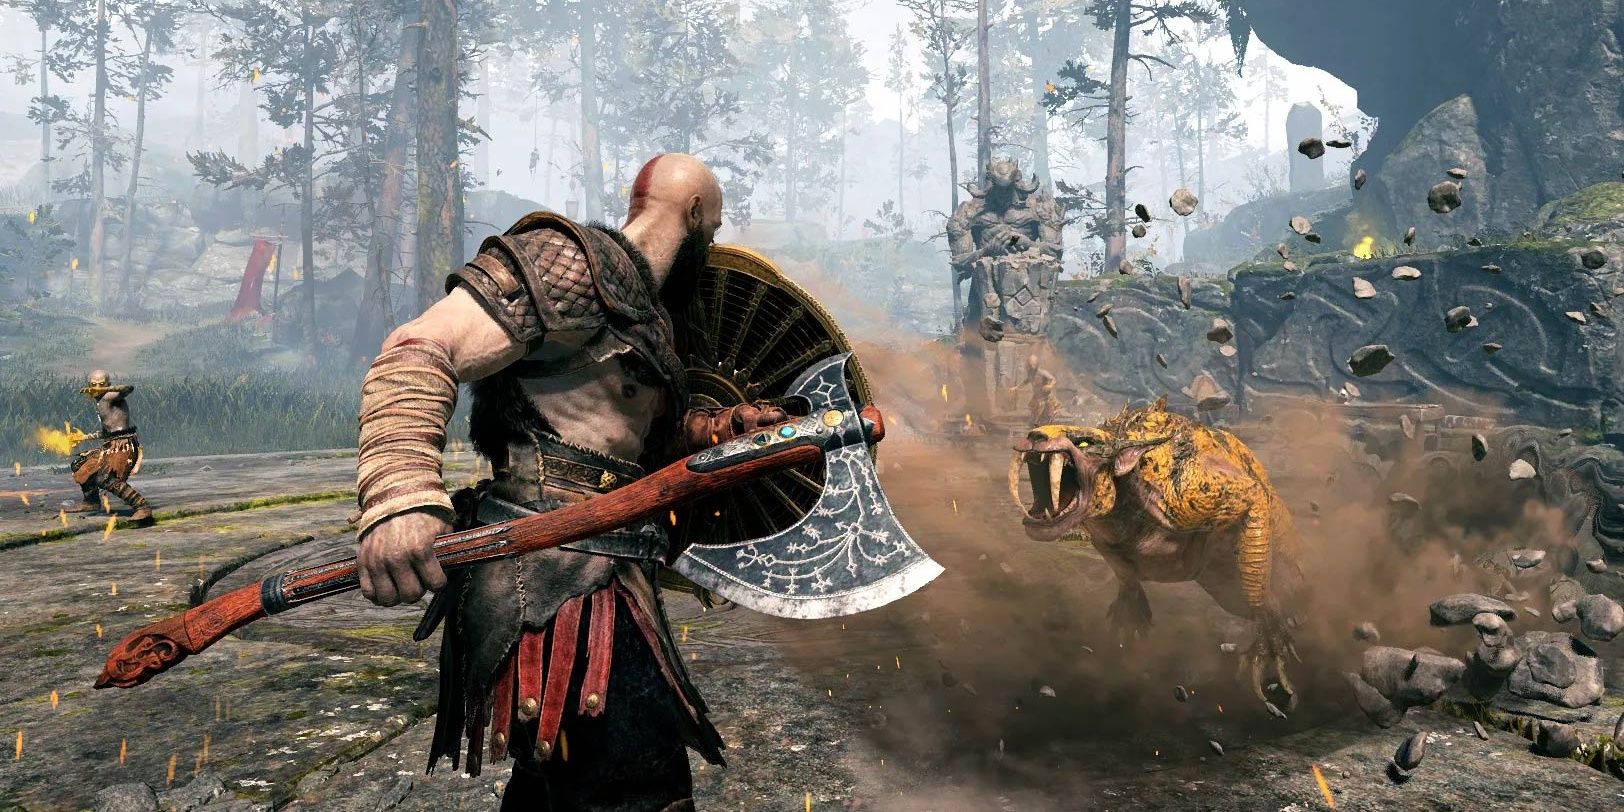 Kratos fights a group of enemies in God of War